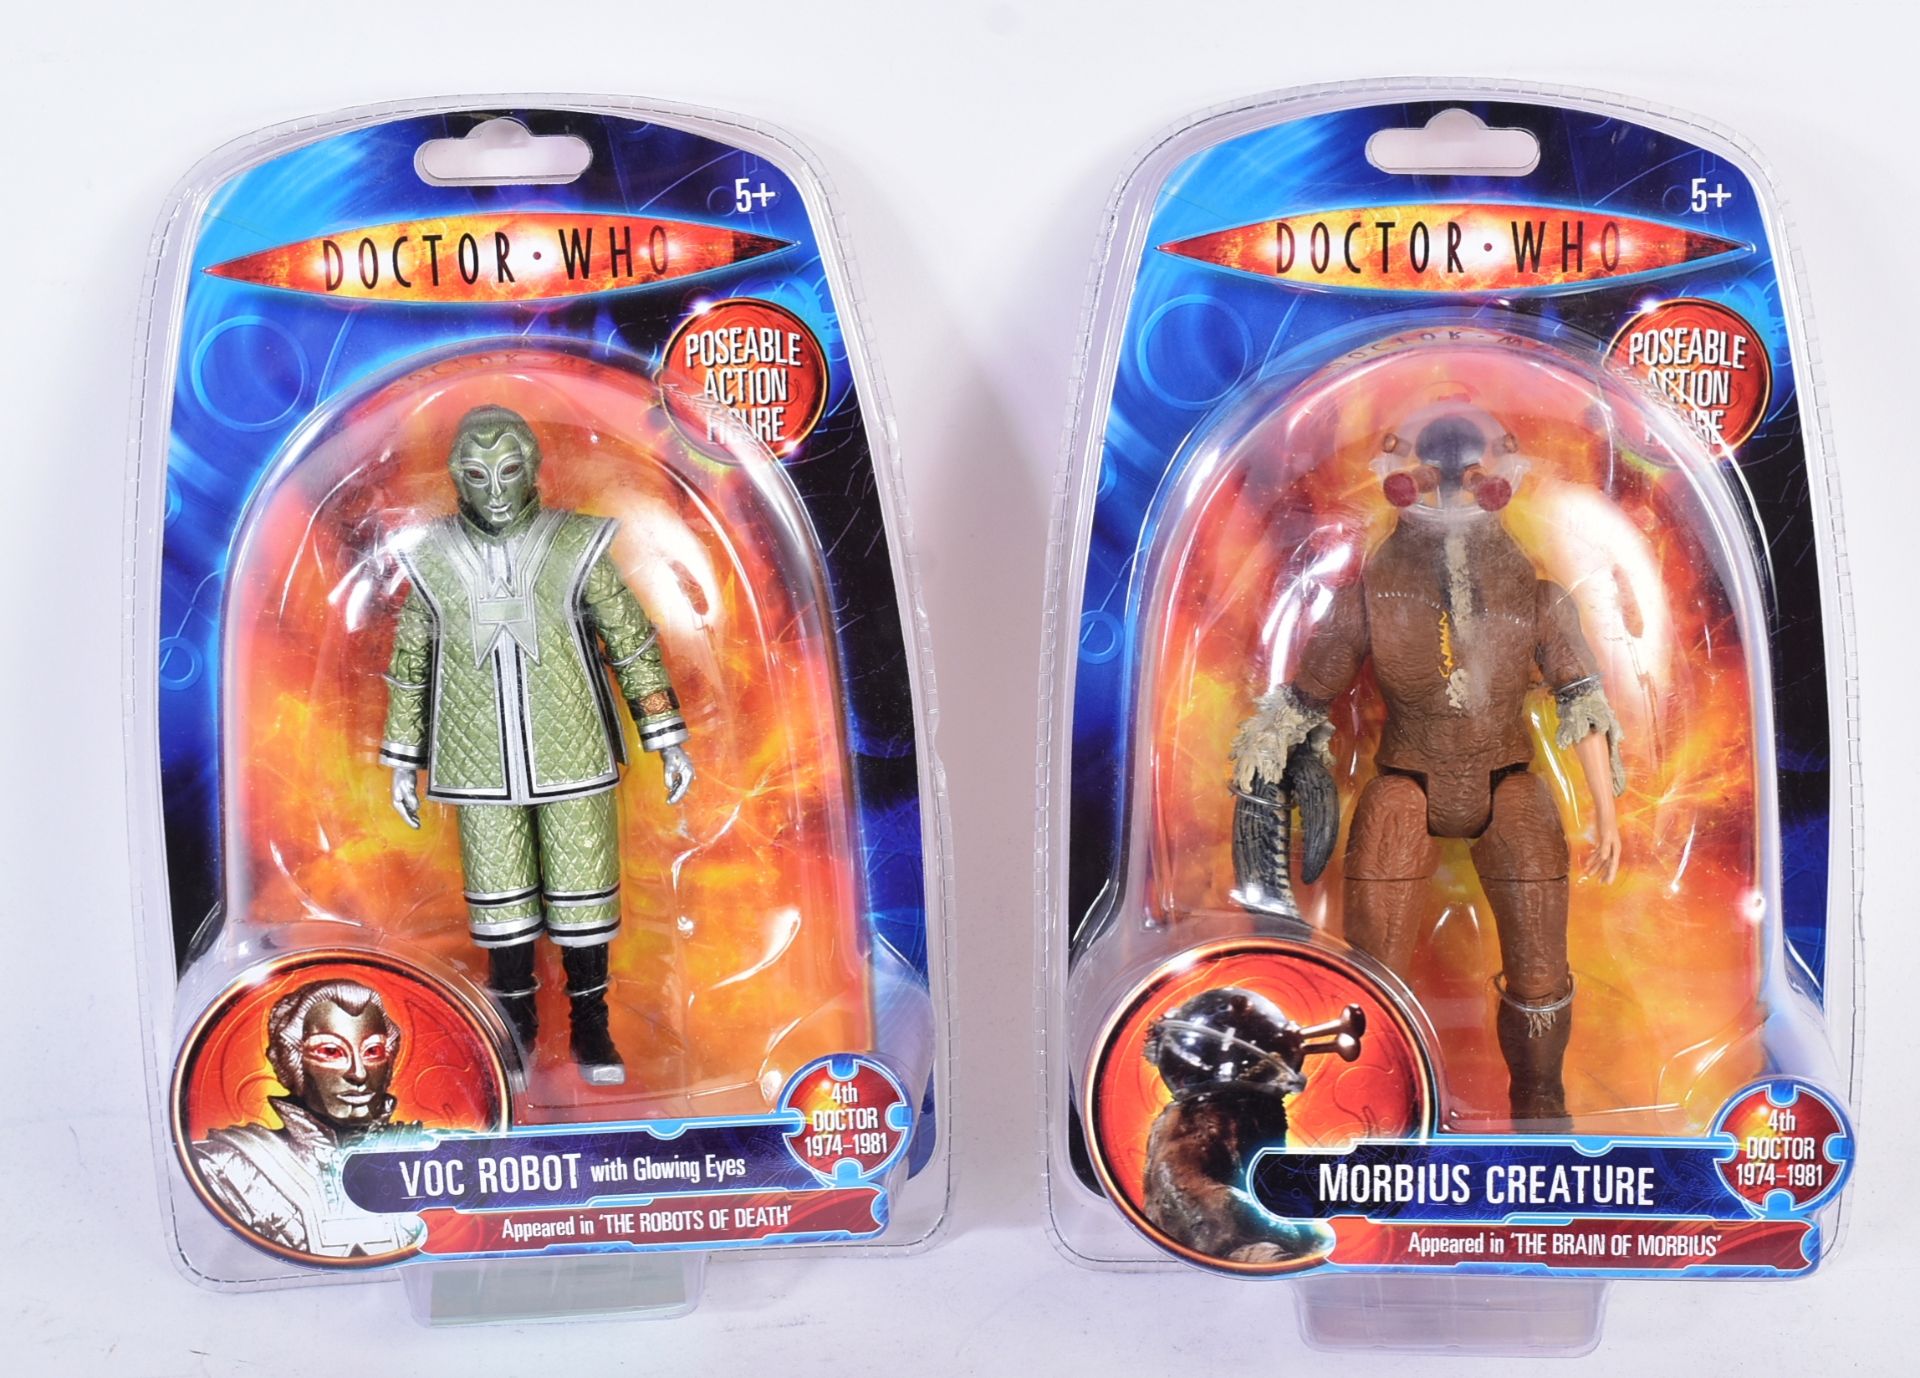 DOCTOR WHO - CHARACTER OPTIONS - VOC ROBOT & MORBIUS CREATURE